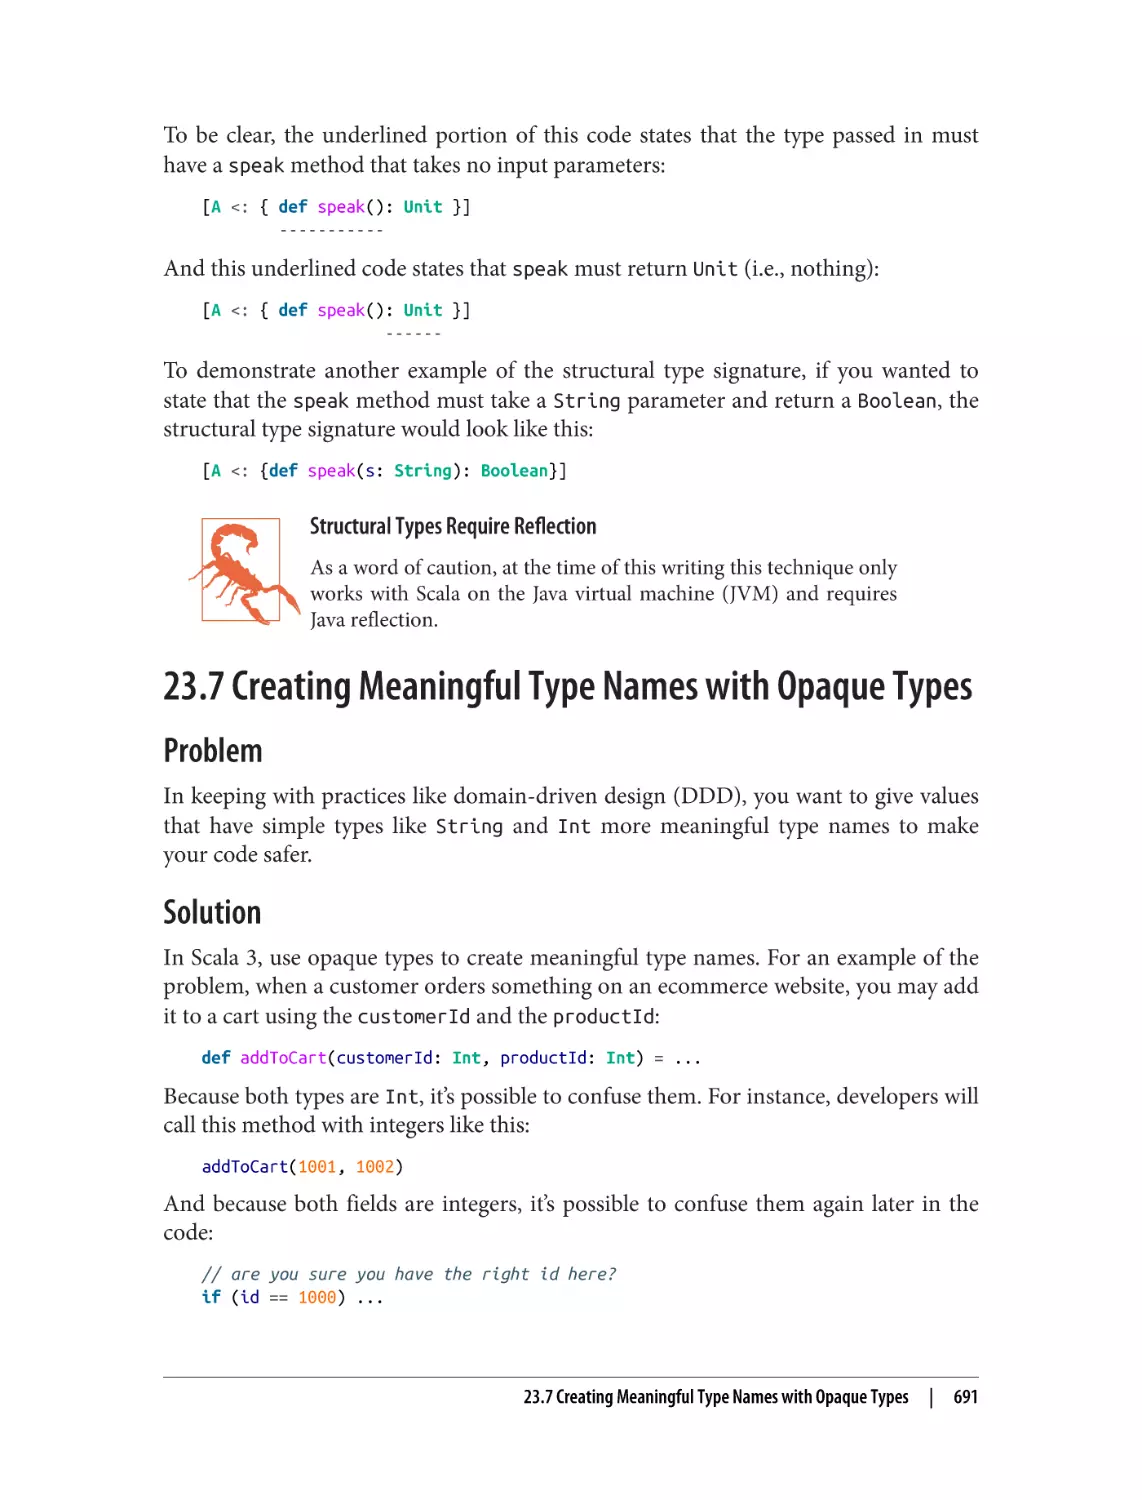 23.7 Creating Meaningful Type Names with Opaque Types
Problem
Solution